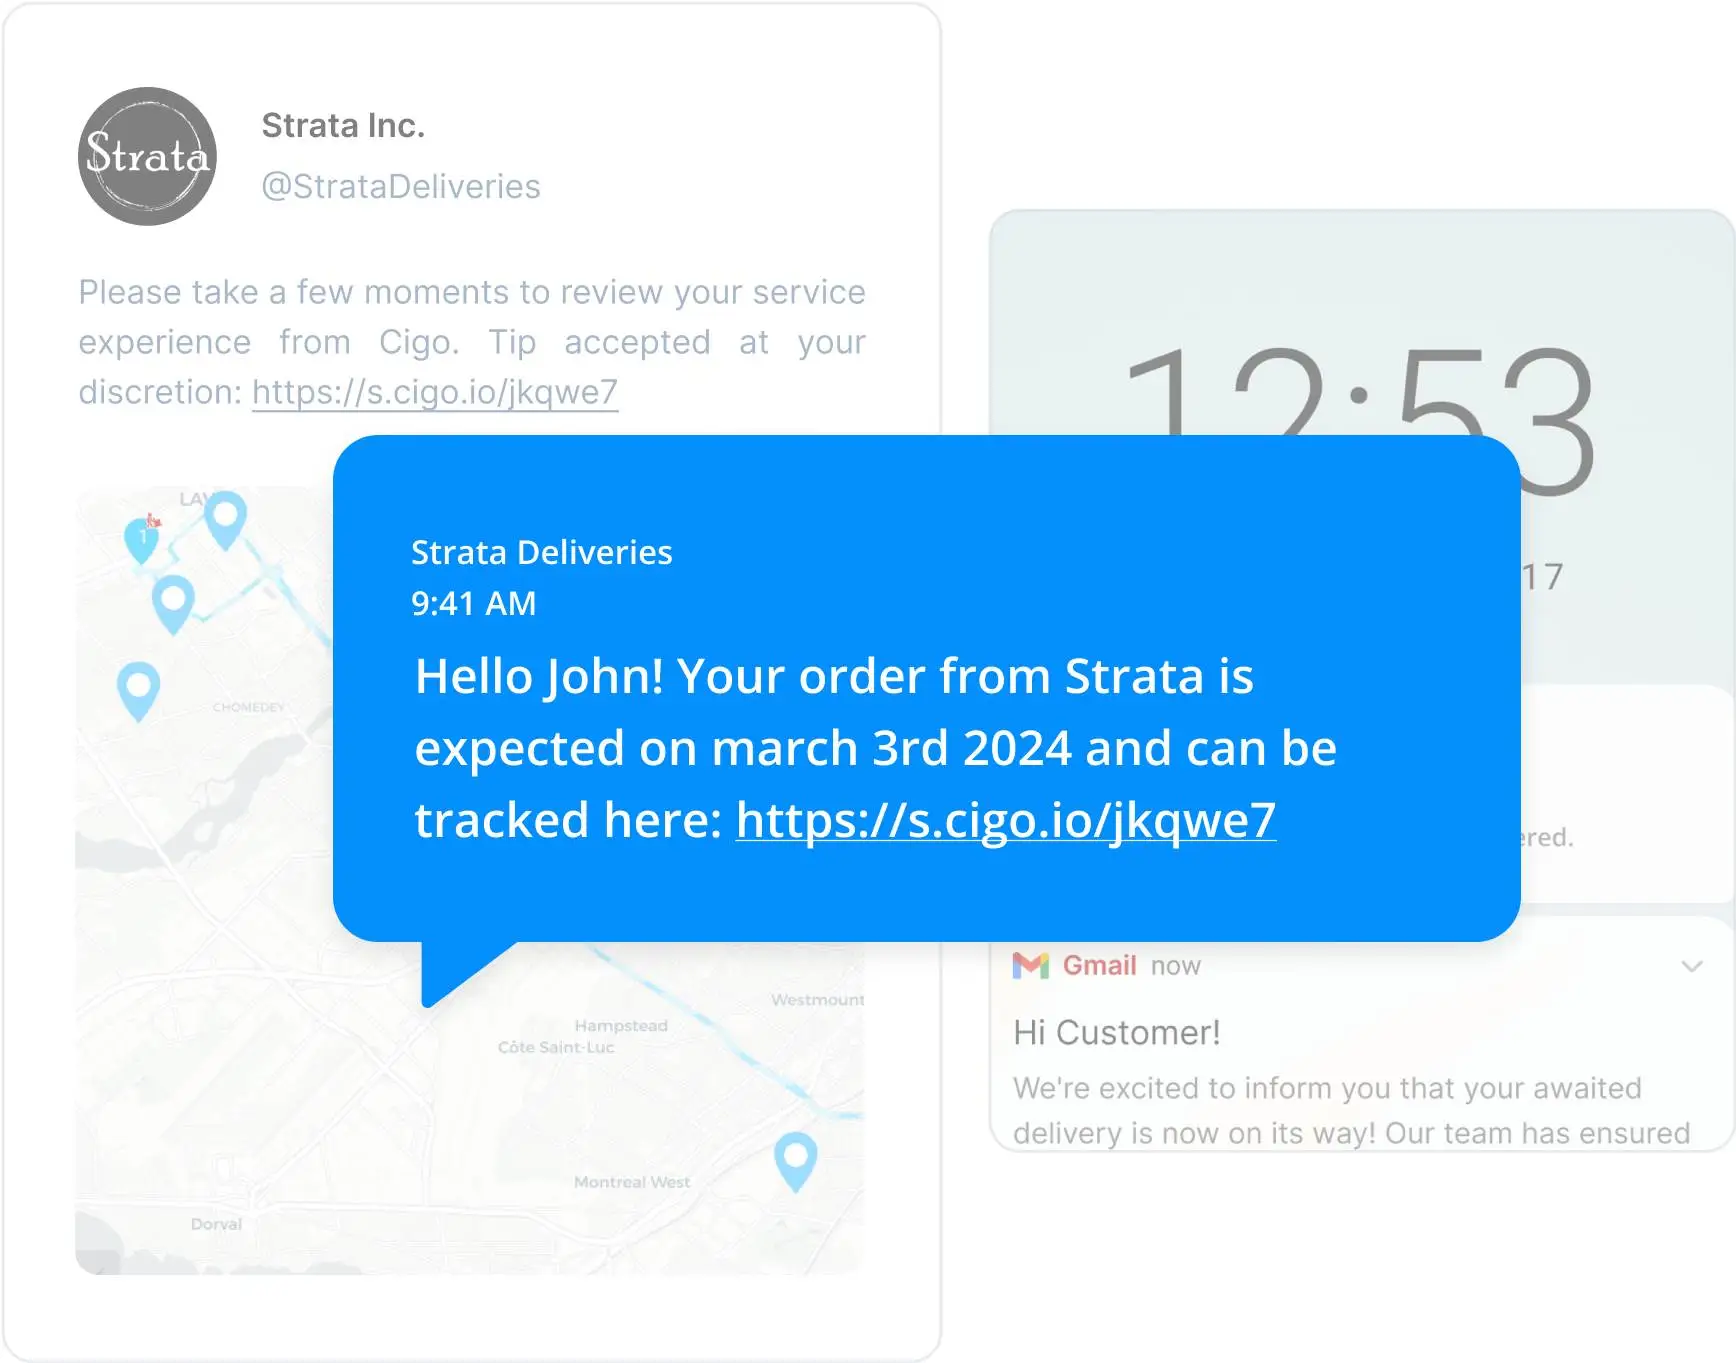 A smartphone displaying multiple notification cards from Strata Inc., with a map showing a delivery route, and a message informing the user that their order from March 3rd is on its way and can be